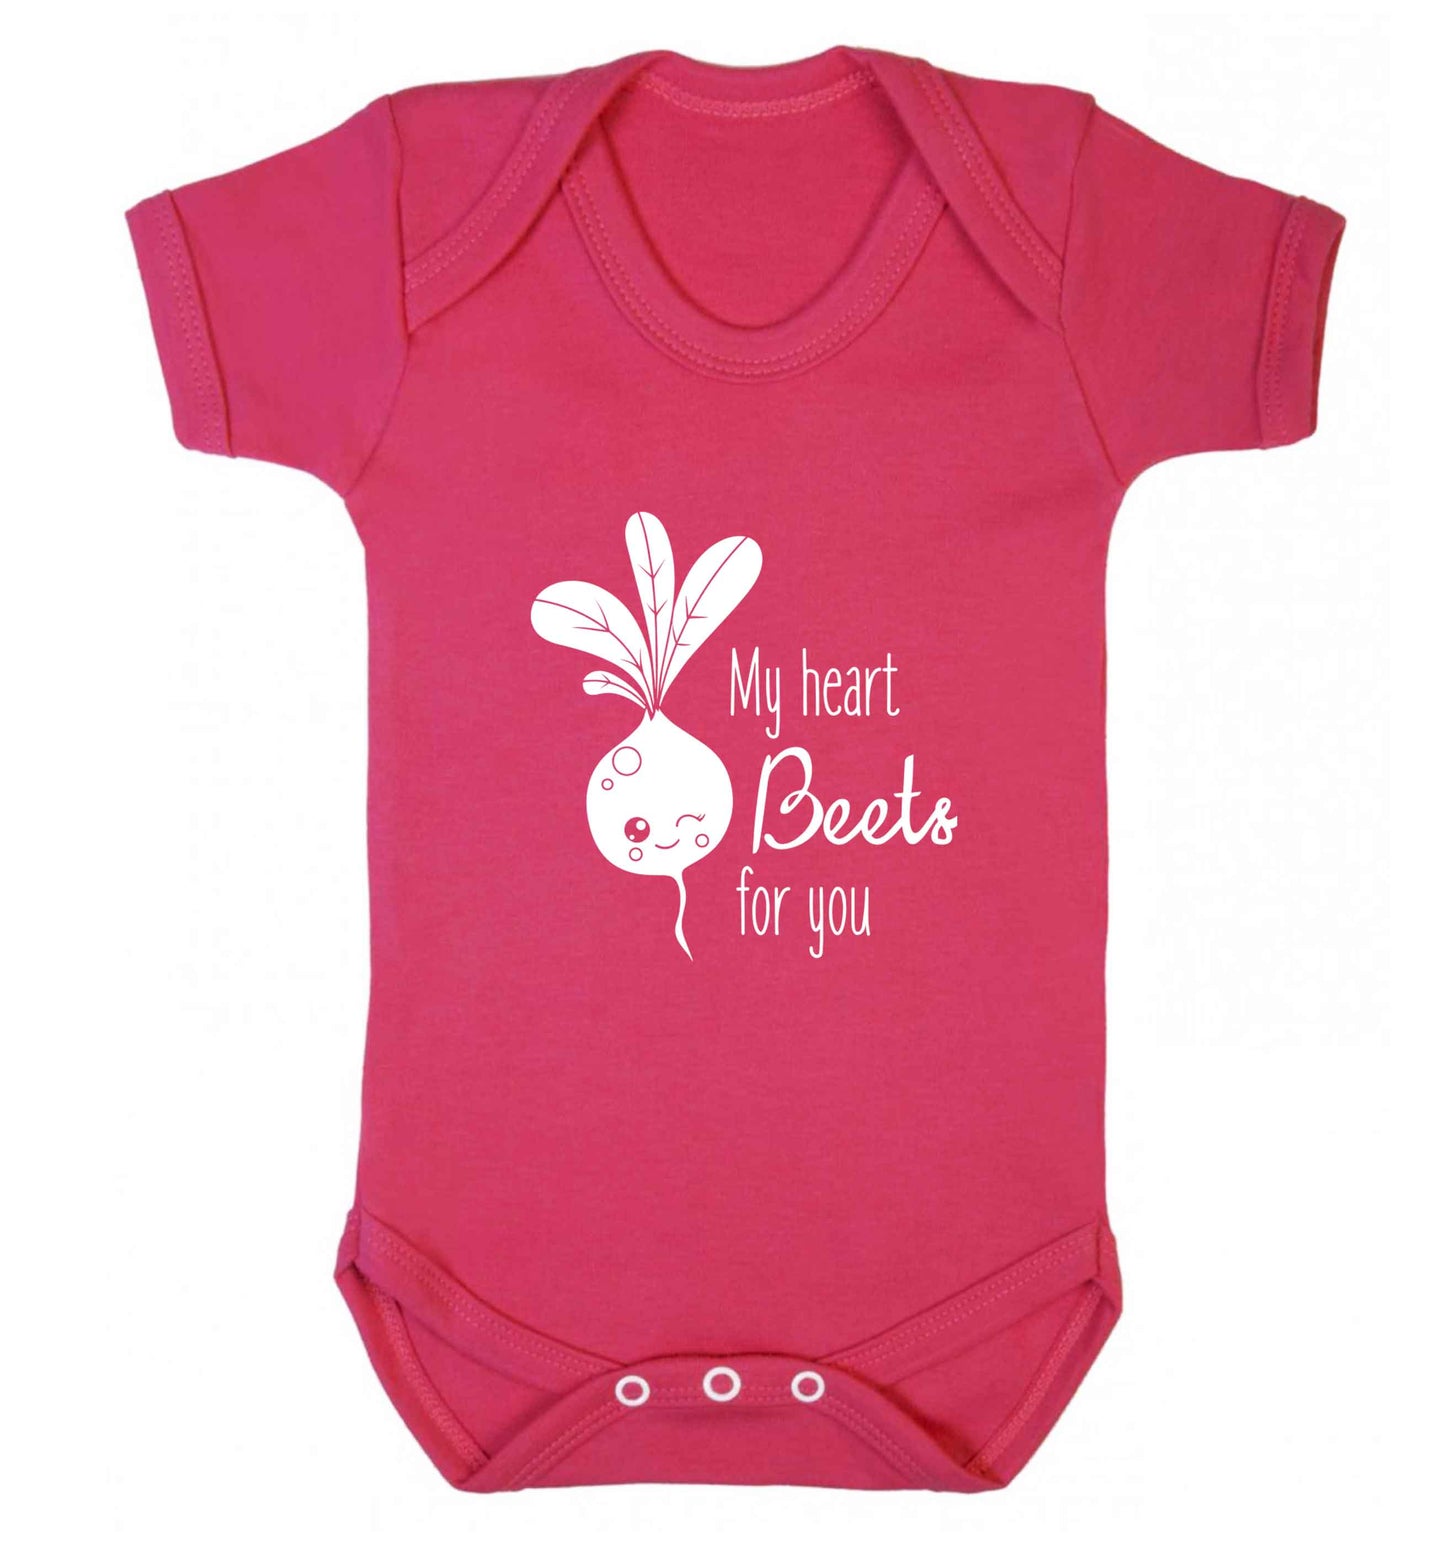 My heart beets for you baby vest dark pink 18-24 months